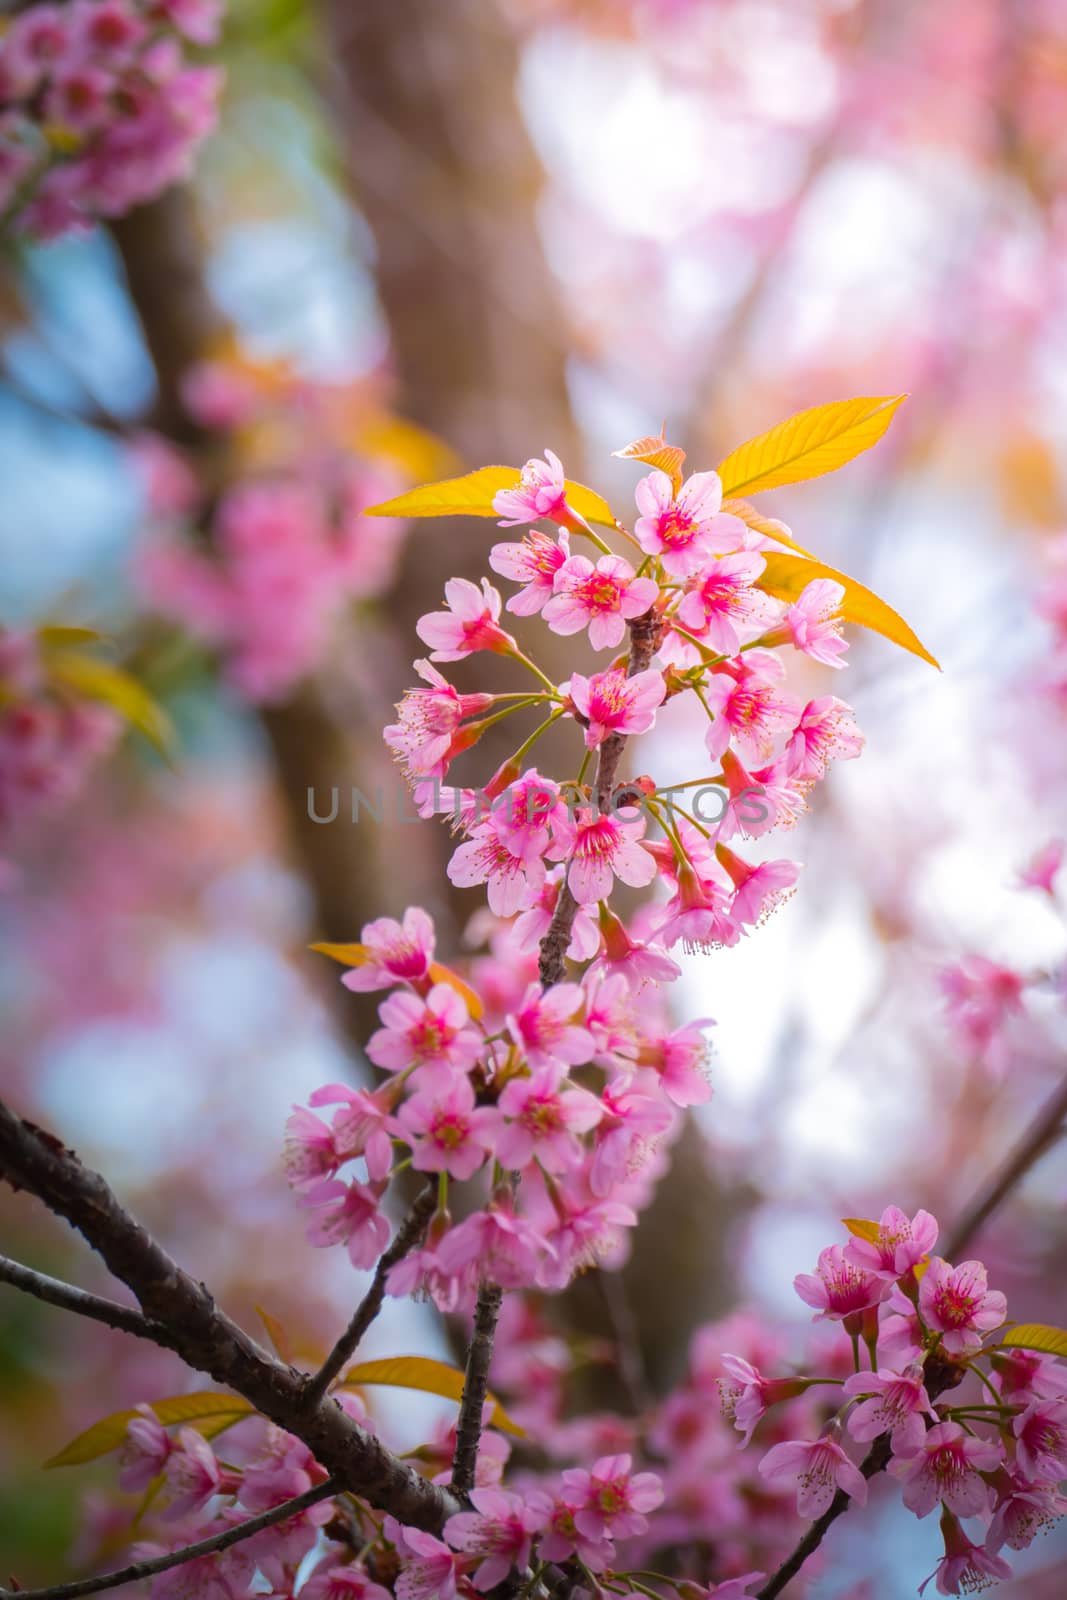 Sakura flowers blooming blossom in Chiang Mai, Thailand, nature background